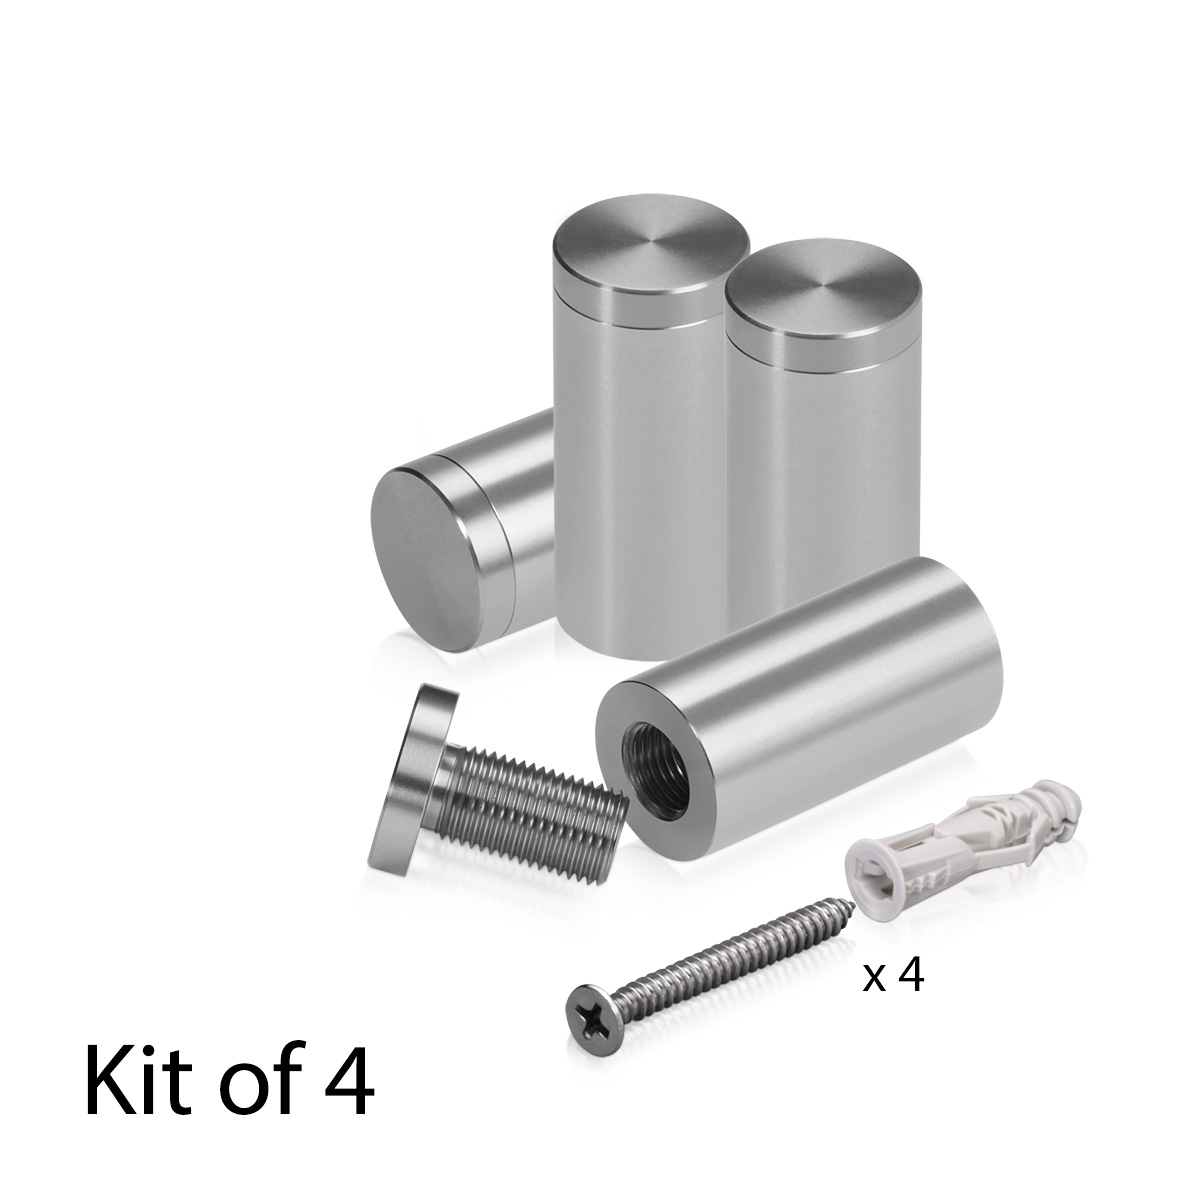 (Set of 4) 3/4'' Diameter X 1-1/2'' Barrel Length, Affordable Aluminum Standoffs, Steel Grey Anodized Finish Standoff and (4) 2216Z Screws and (4) LANC1 Anchors for concrete/drywall (For Inside/Outside) [Required Material Hole Size: 7/16'']